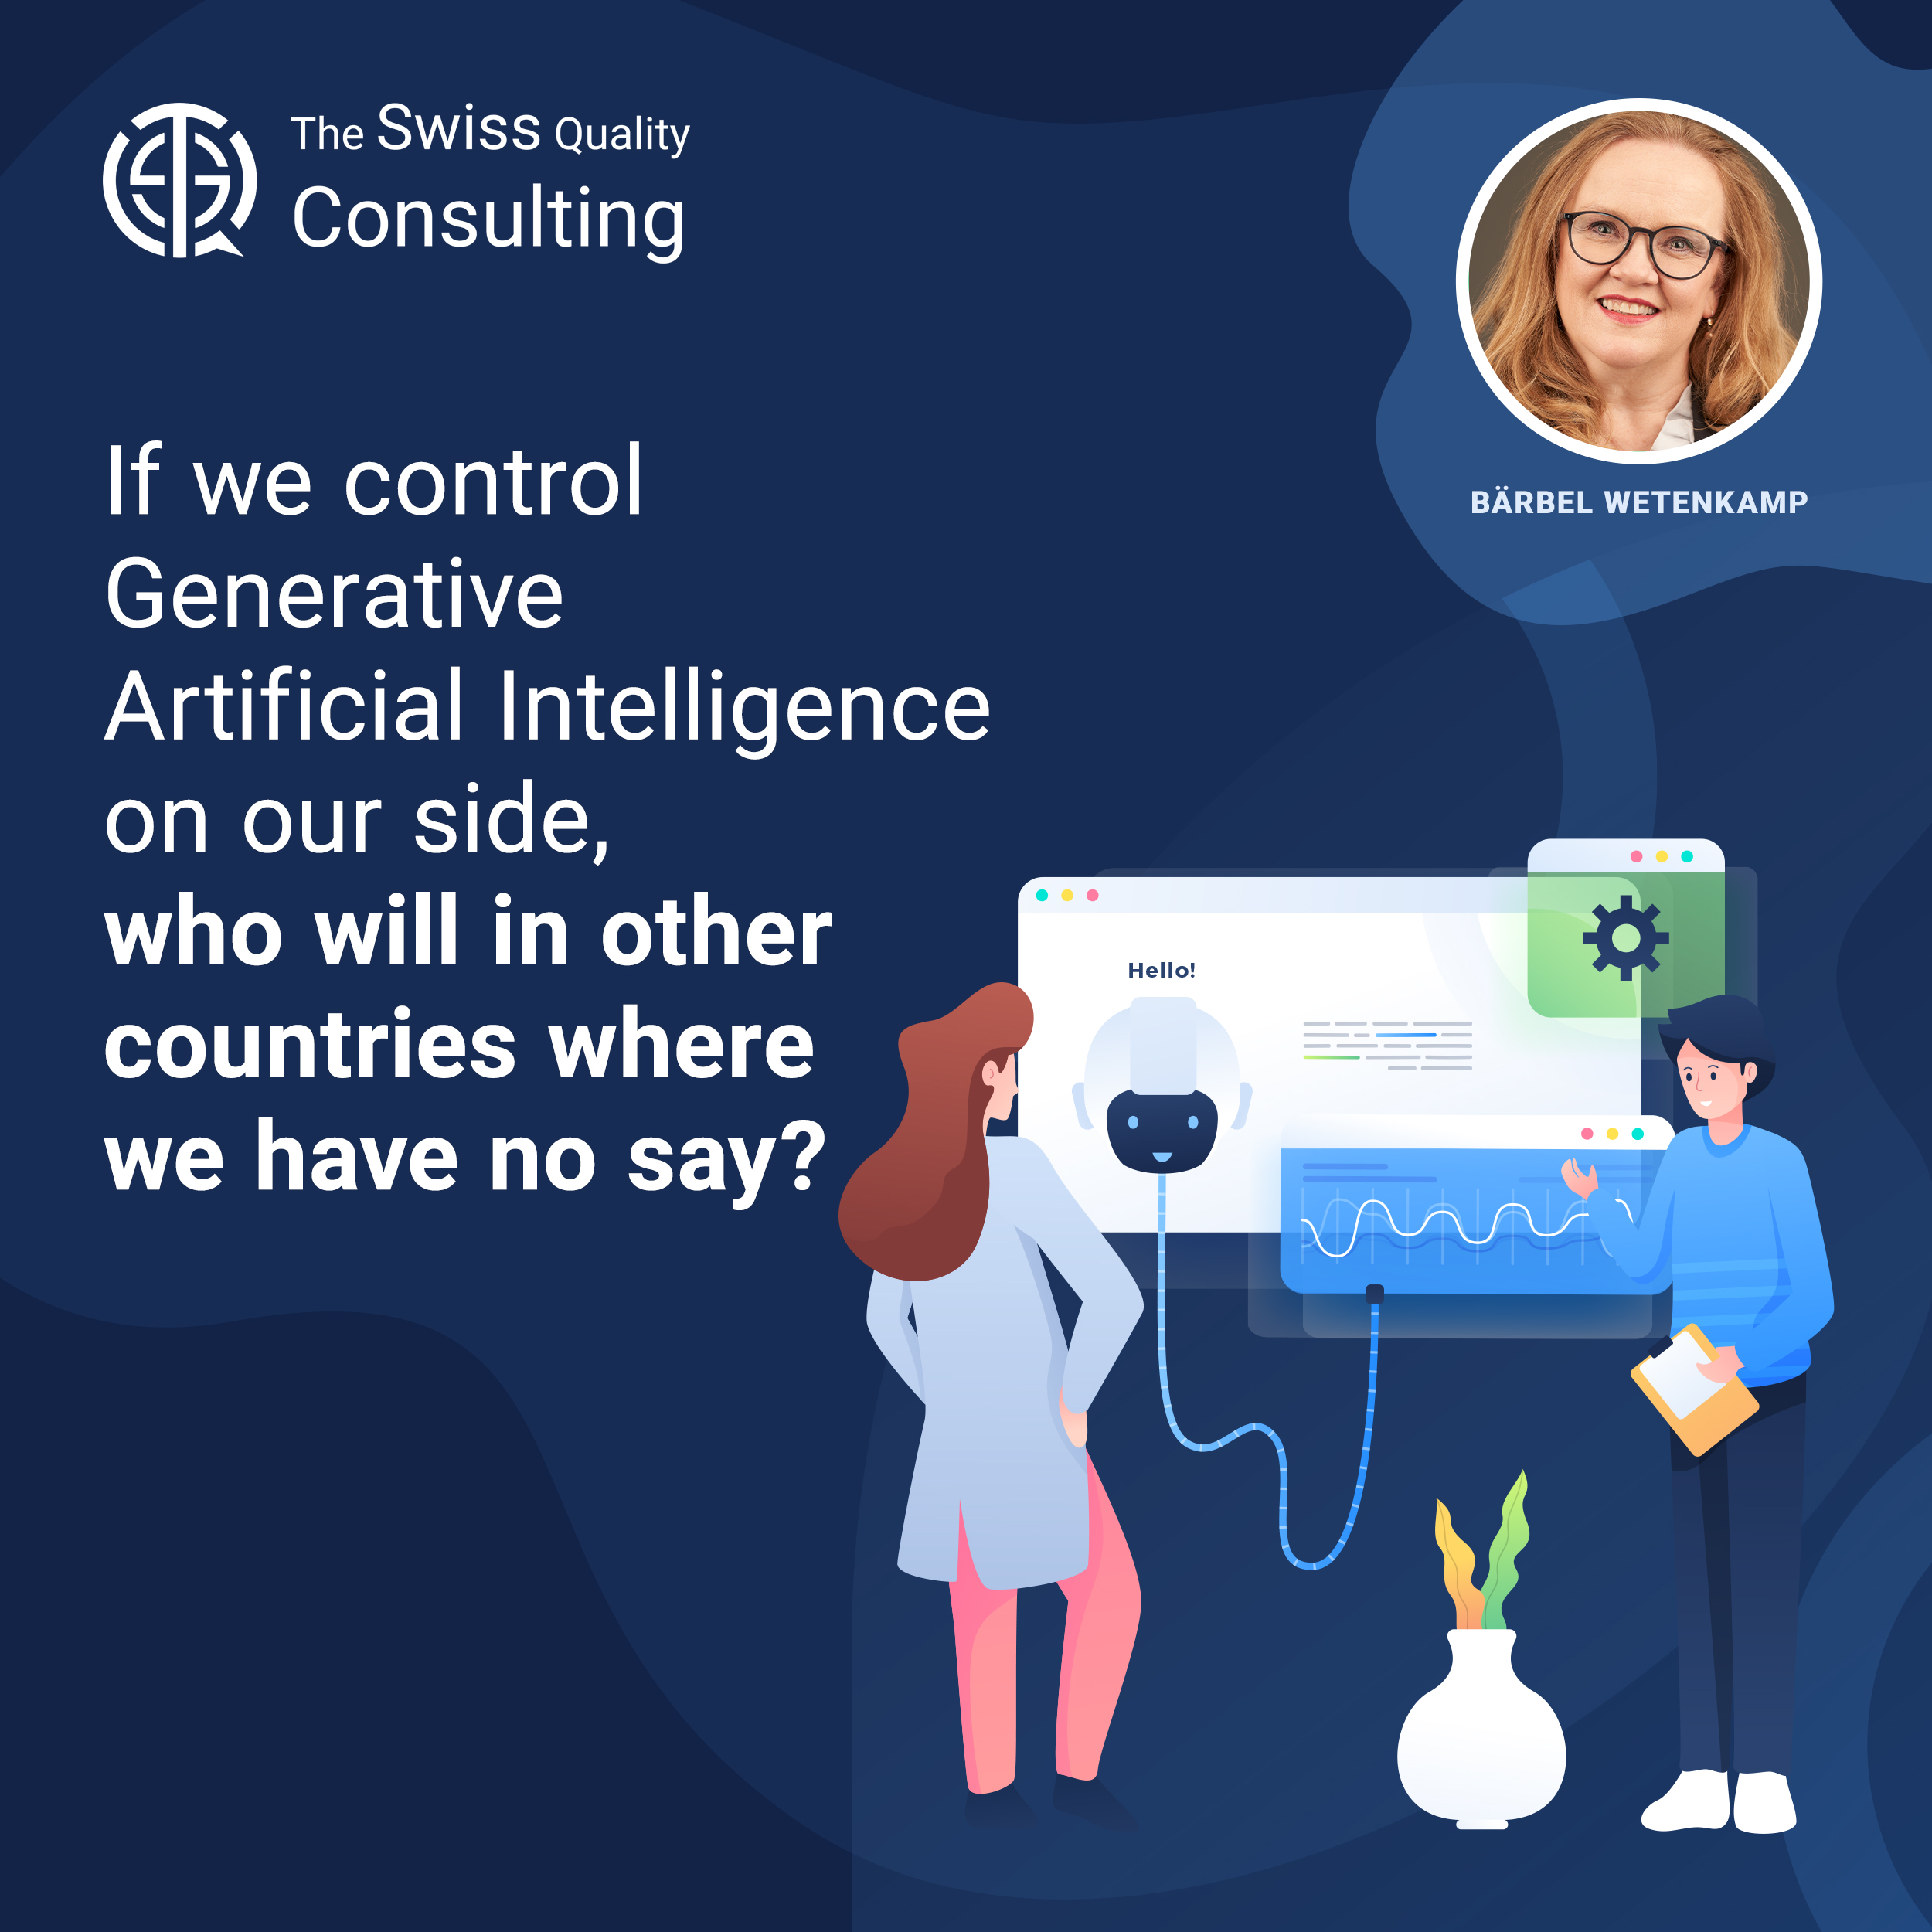 If we control Generative Artificial Intelligence on our side, who will in other countries where we have no say?